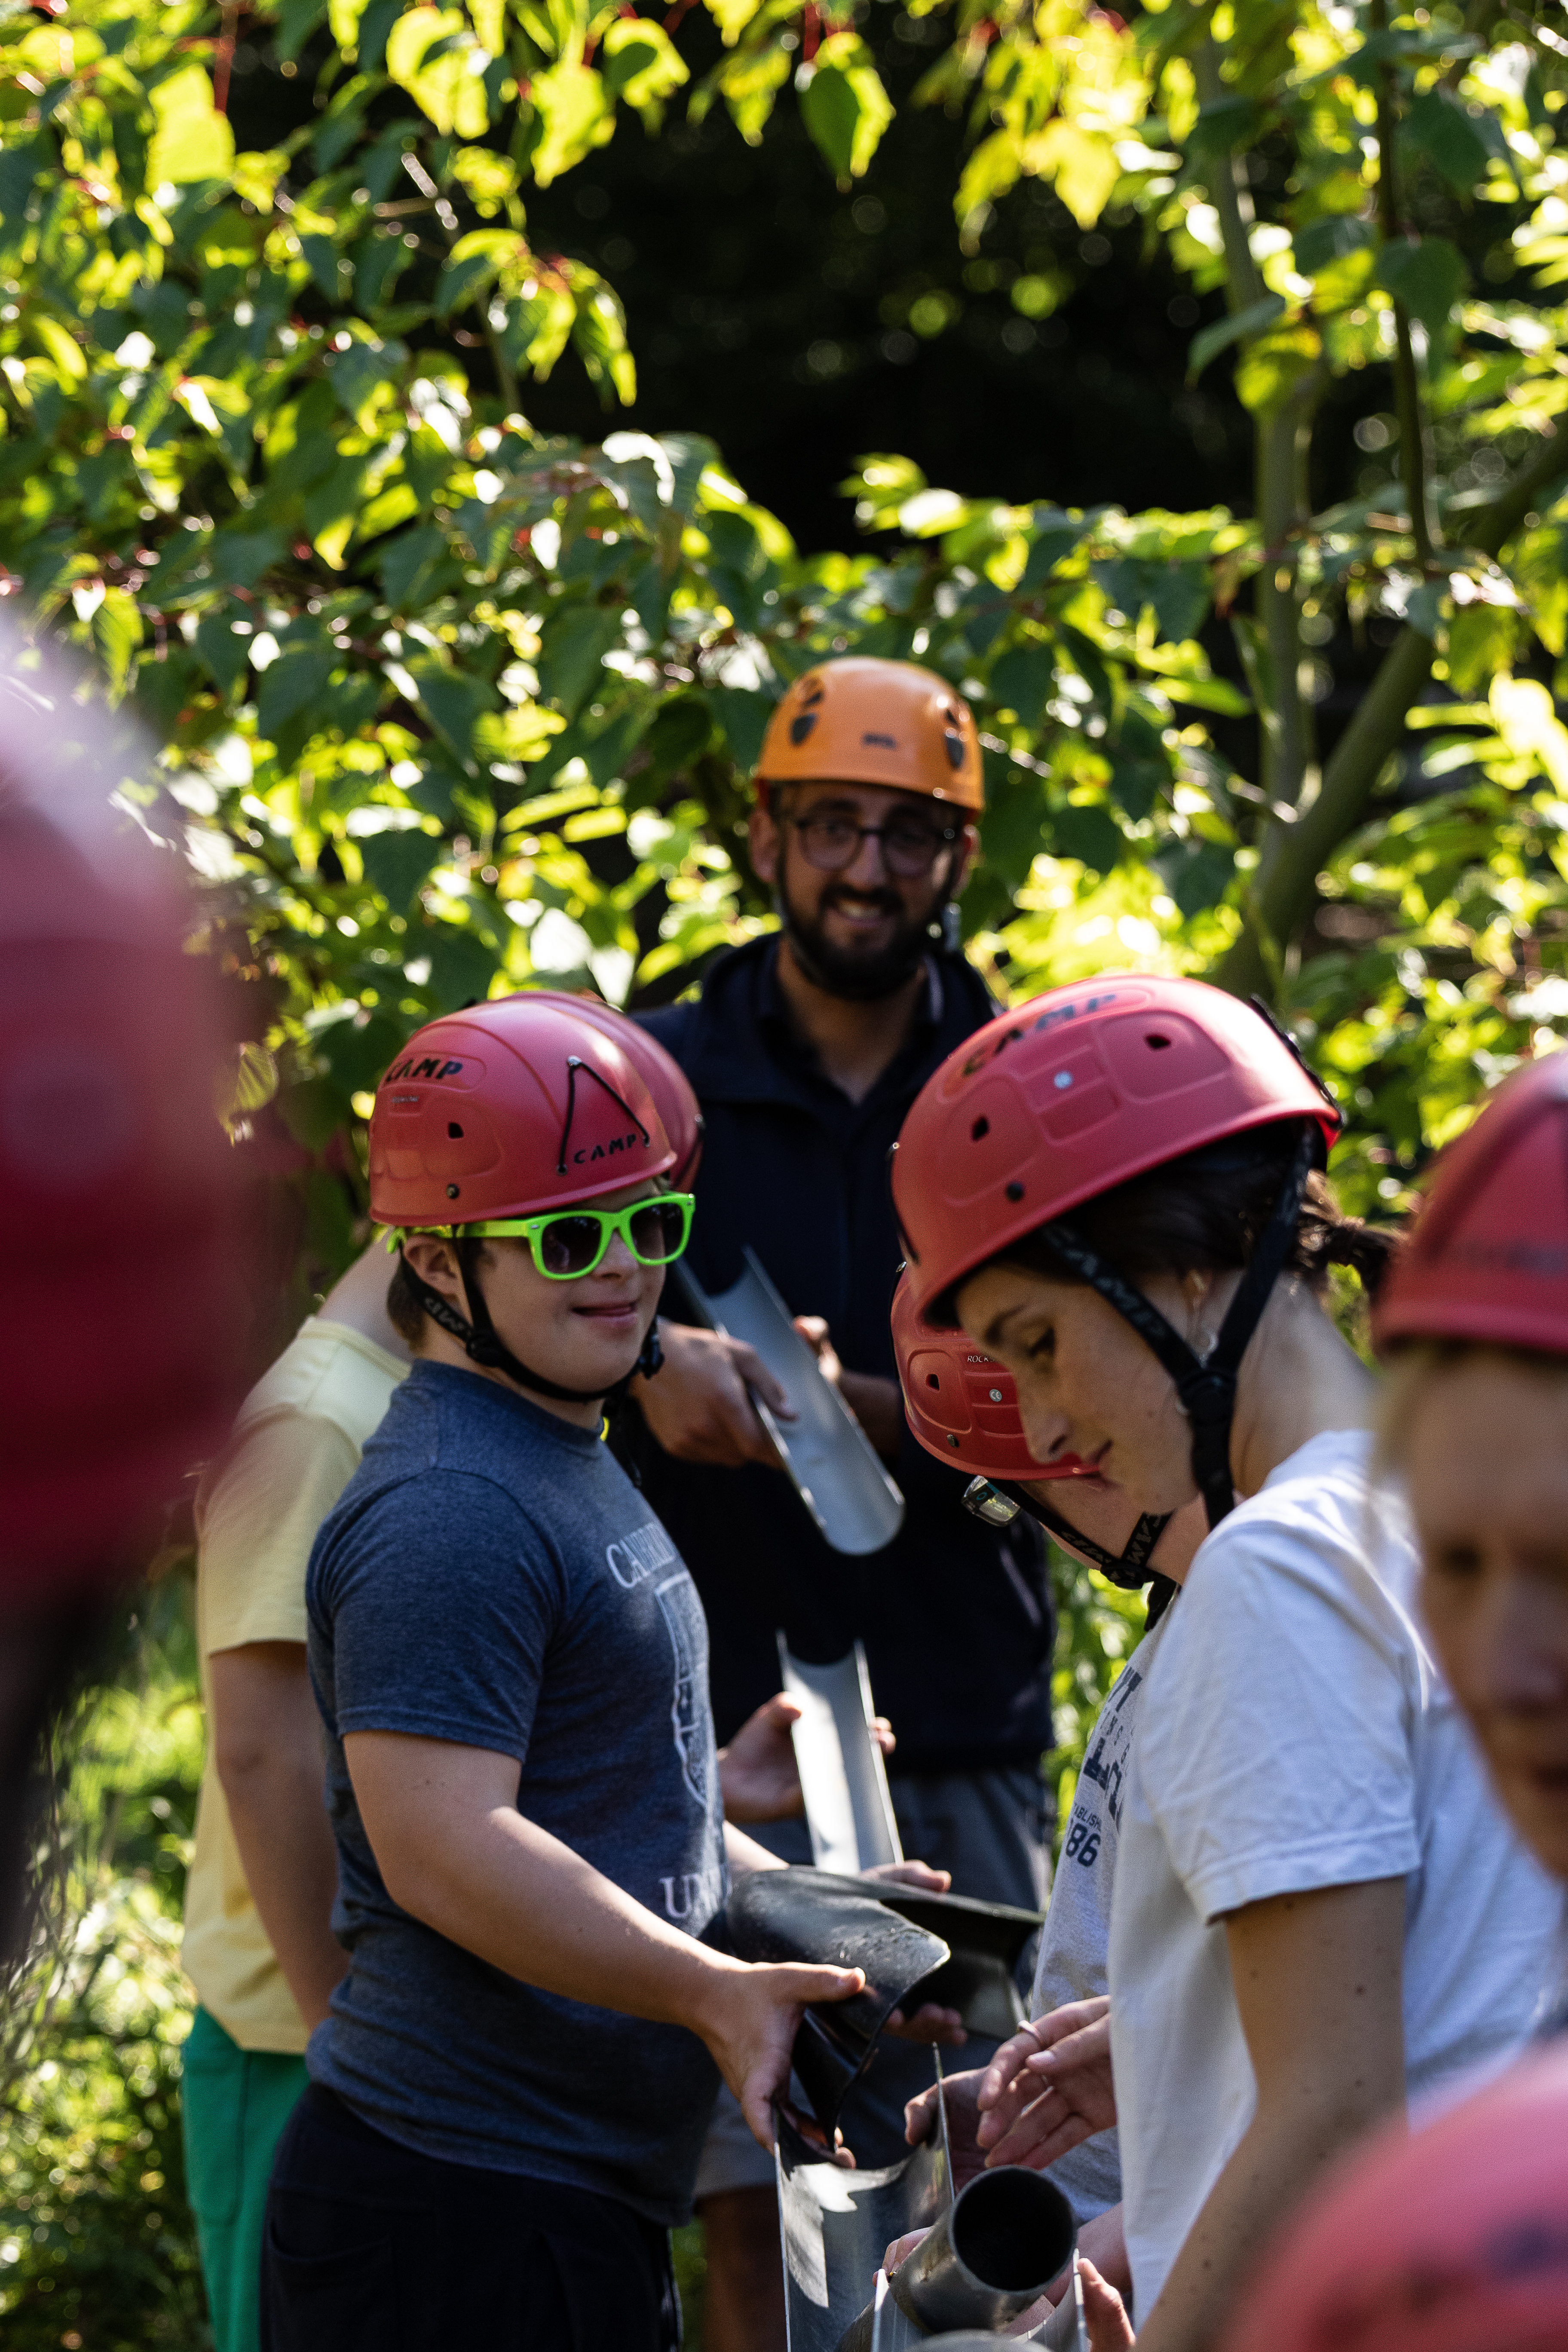 A group of Calvert Exmoor guests on the challenge course, wearing helmets